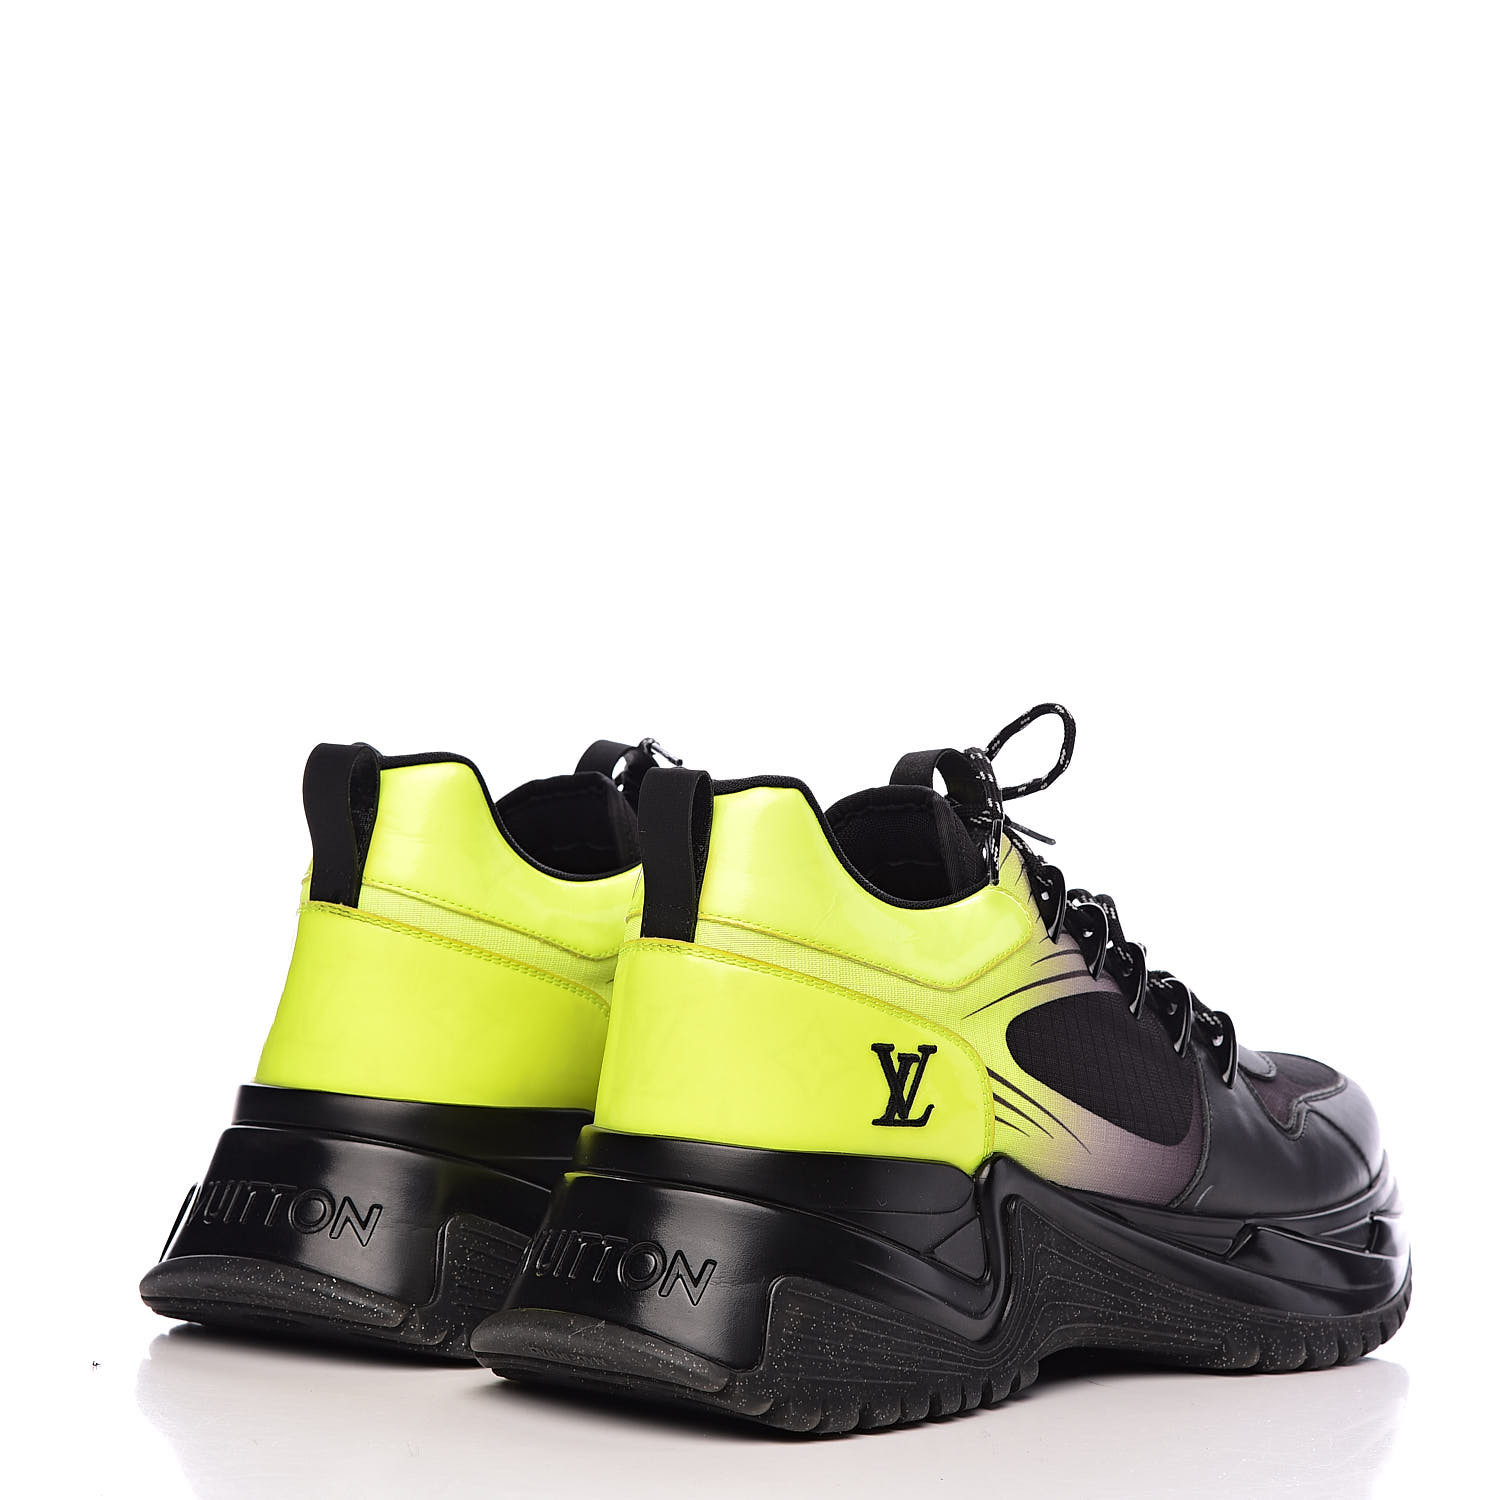 Buy Louis Vuitton Run Away Shoes: New Releases & Iconic Styles